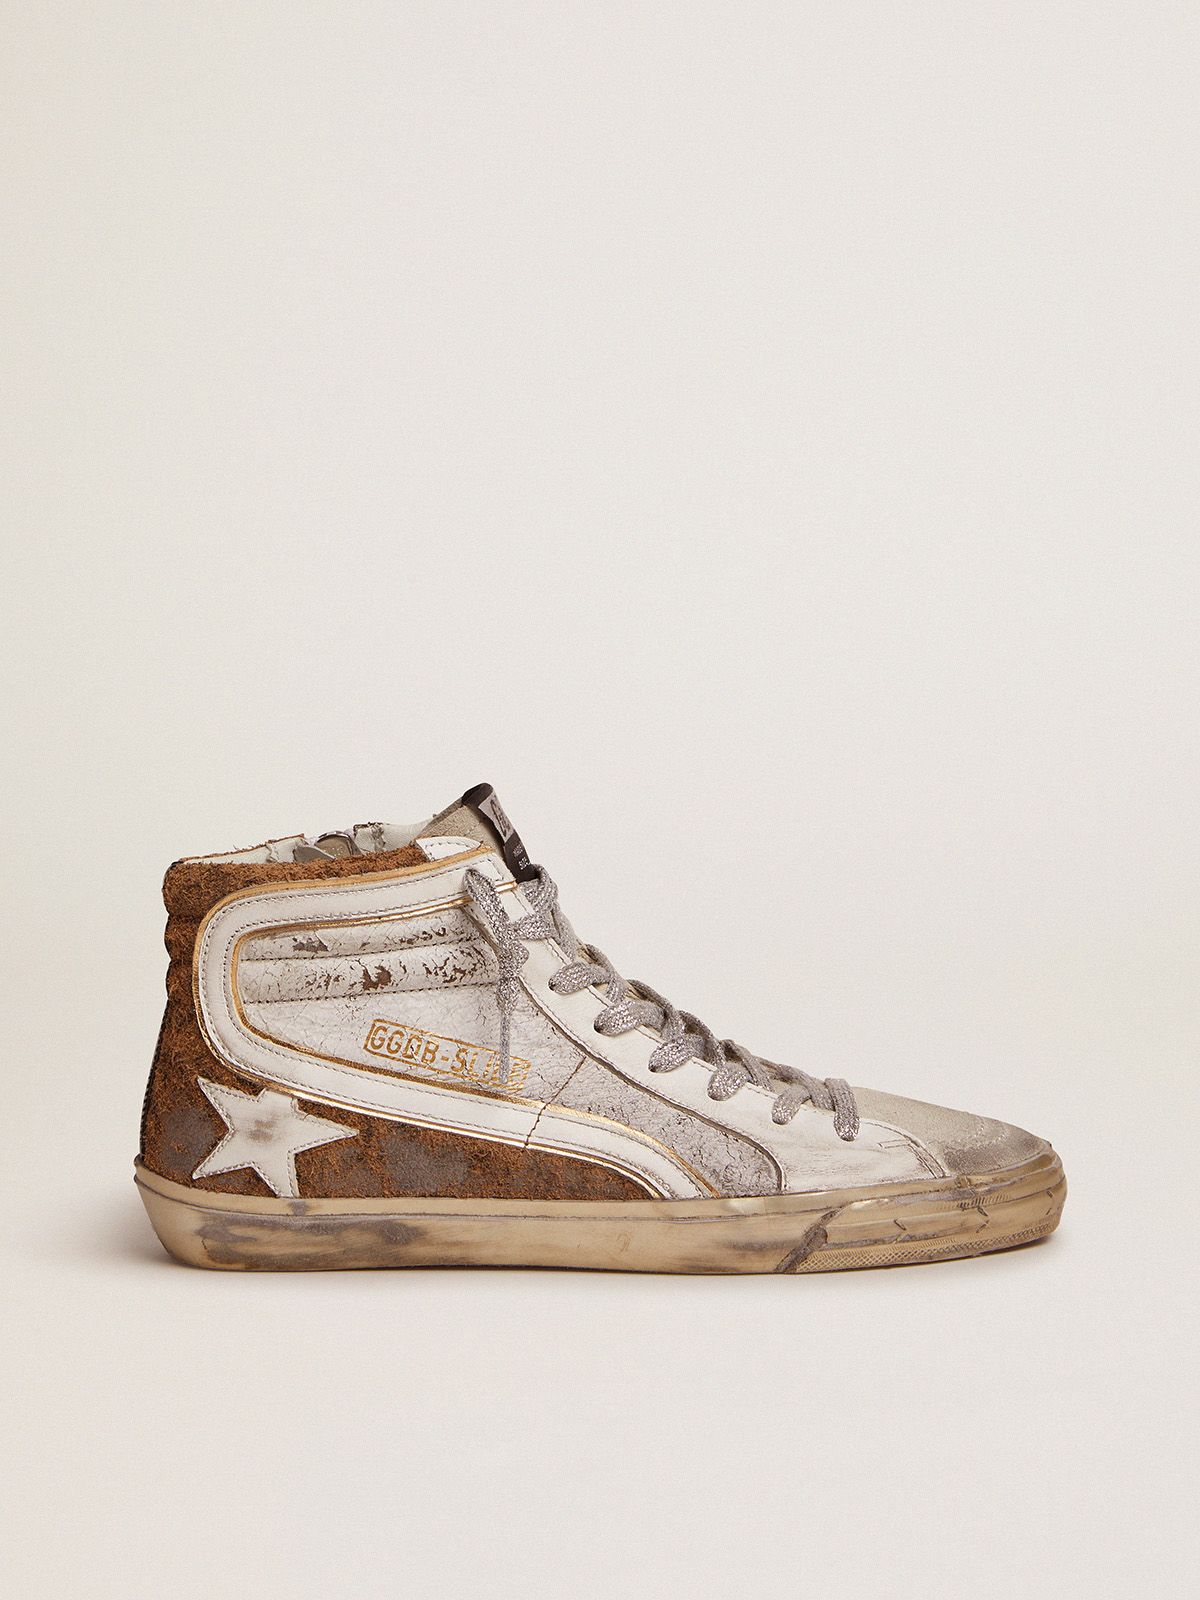 golden goose sneakers Slide and suede crackle in leather leopard-print